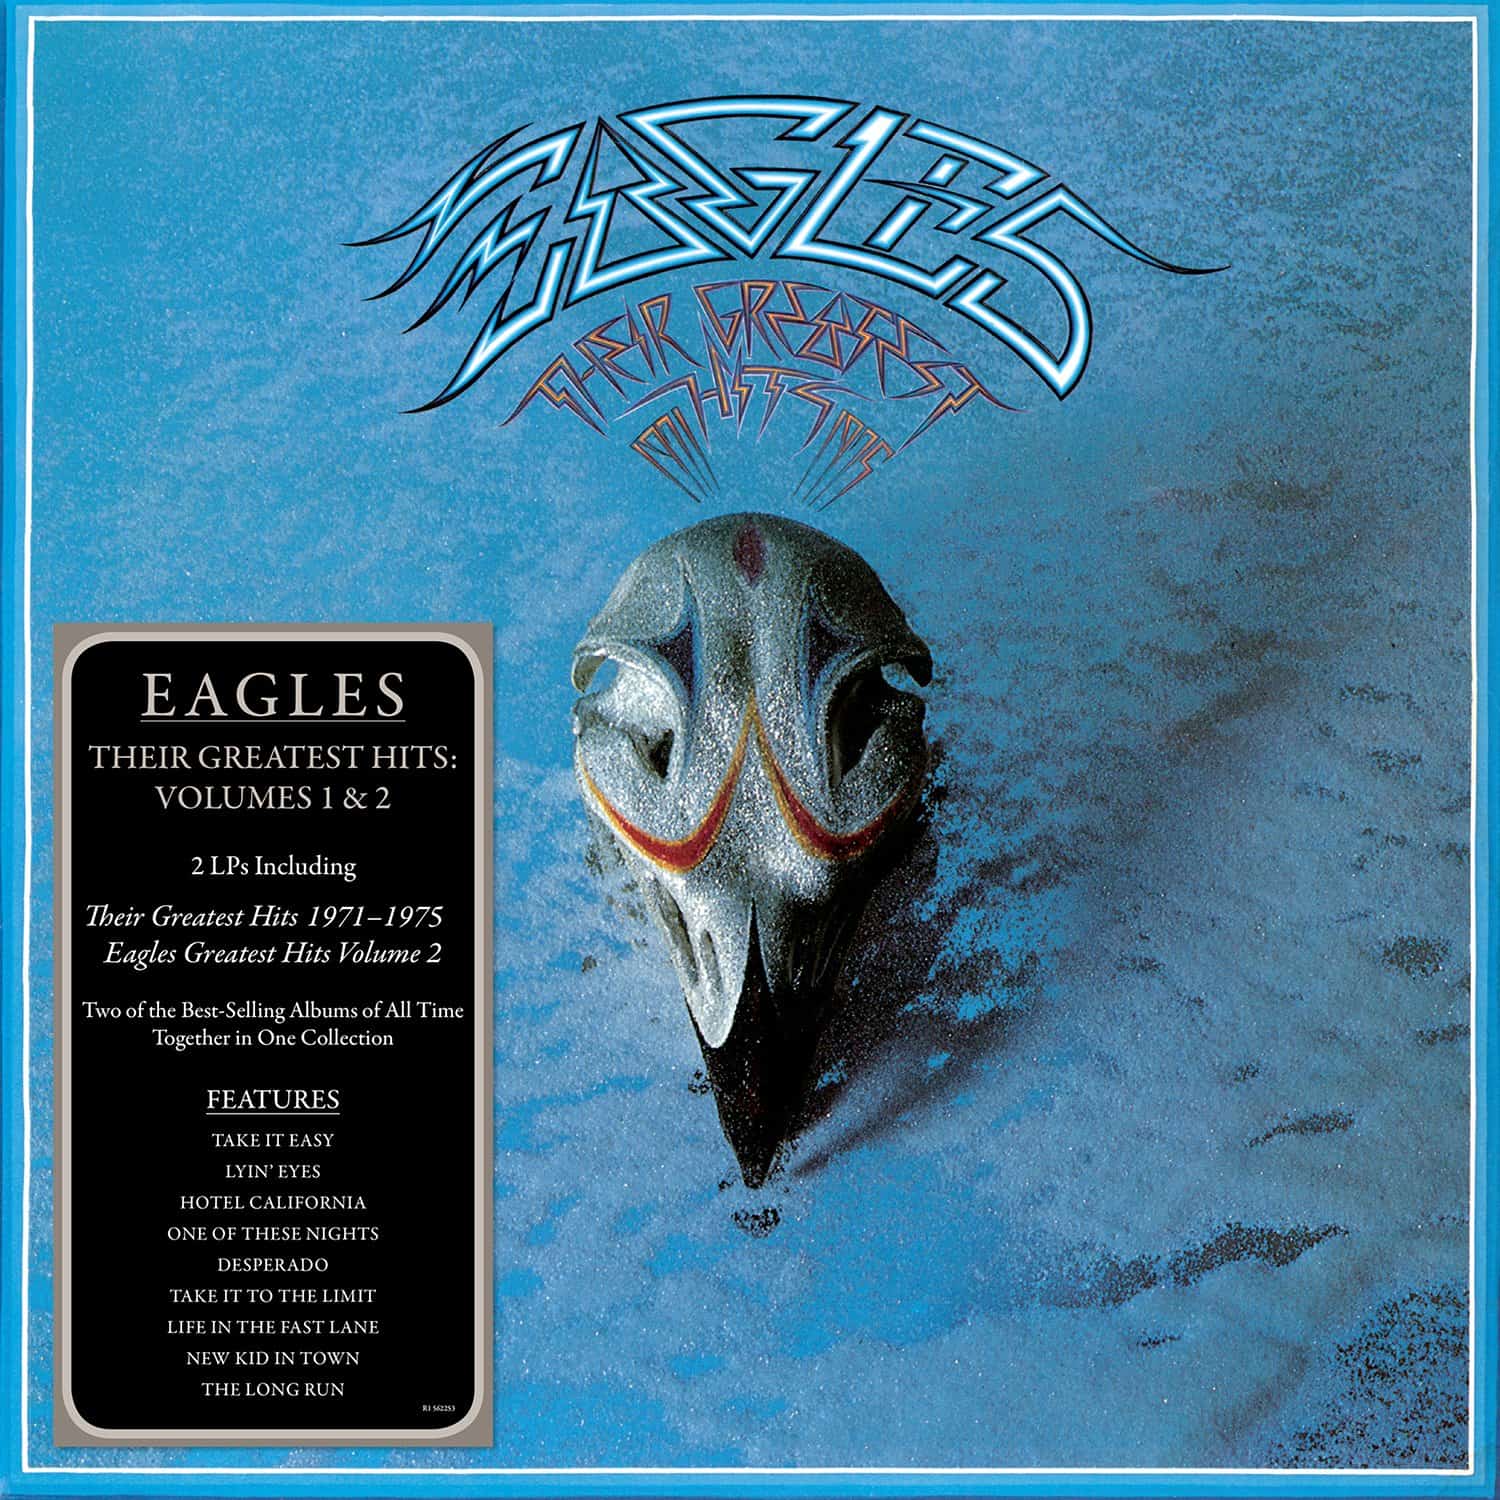 The-Eagles-Greatest-Hits-1-and-2-record-album1